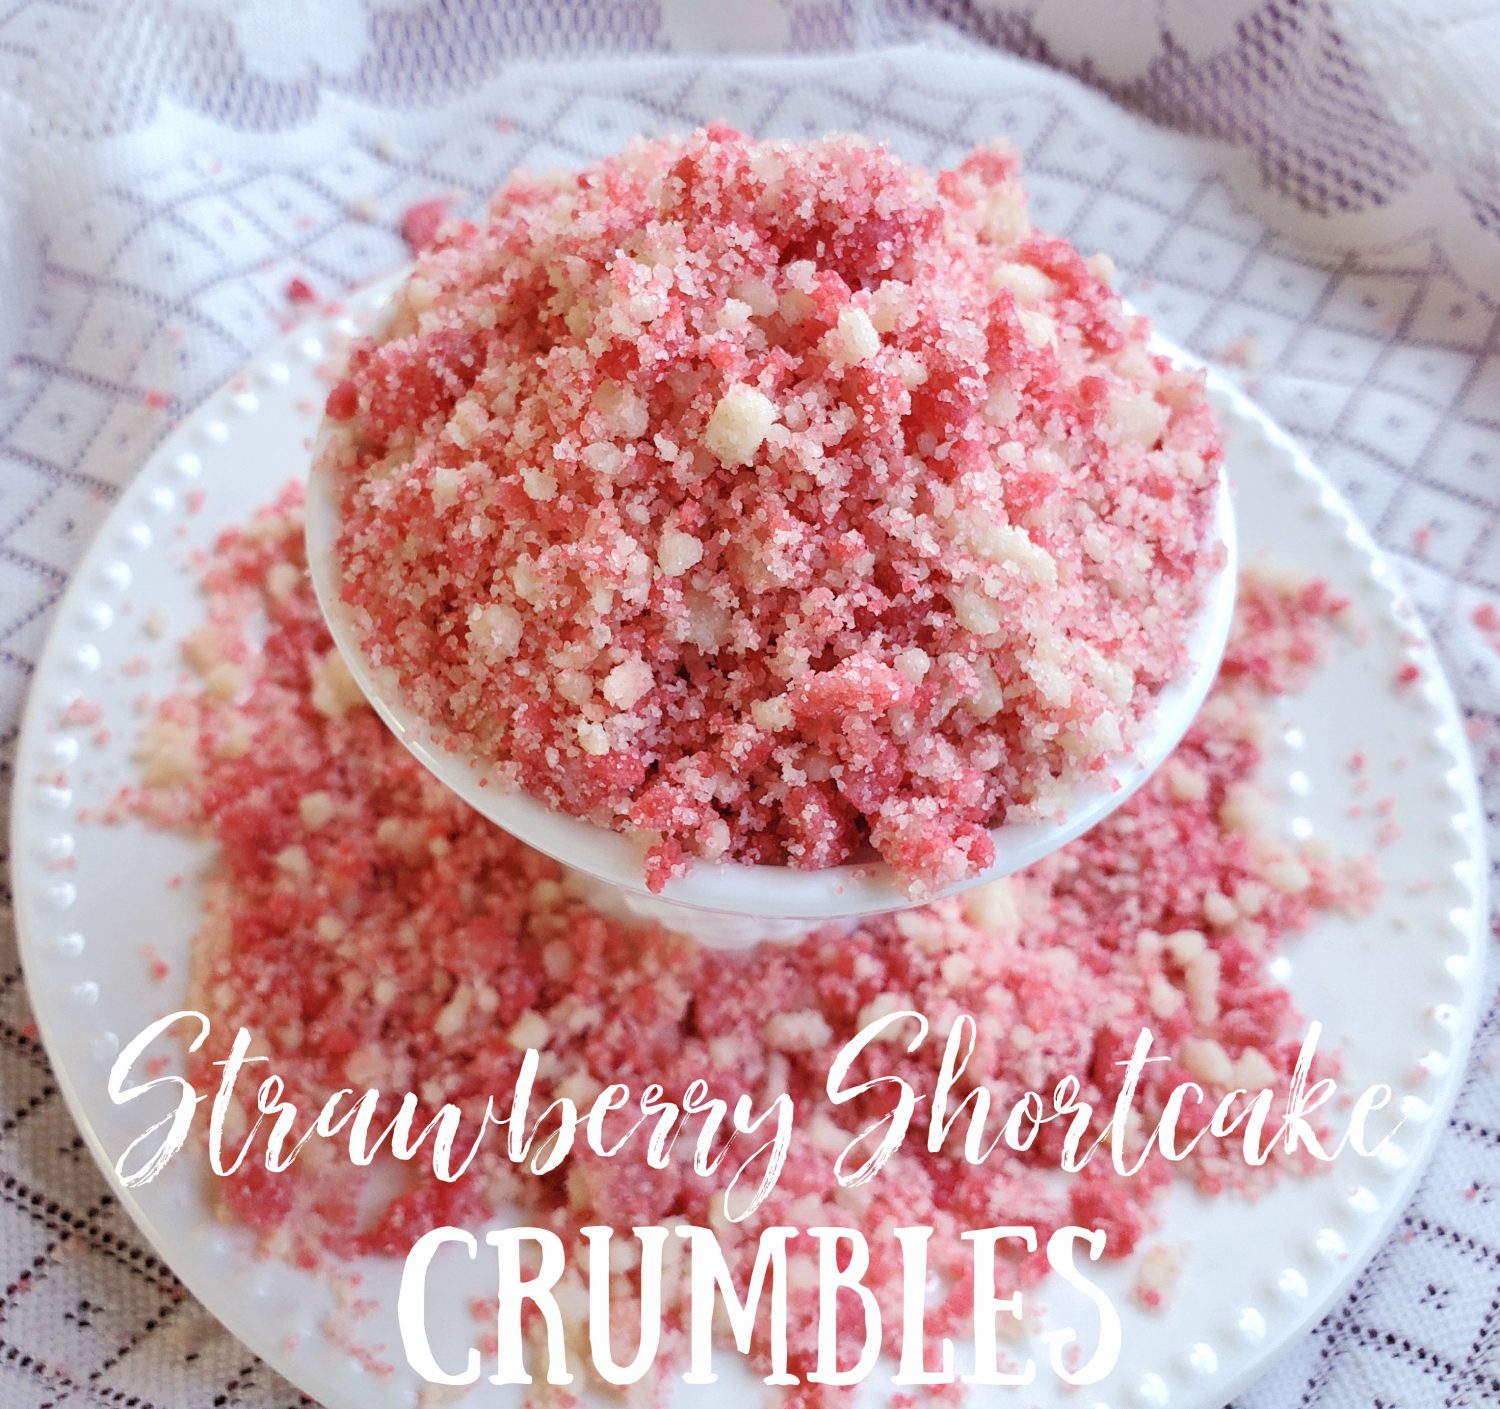 Strawberry Shortcake Crumbles deliver a pink punch of intense strawberry flavor and vanilla crumbles perfect for pies, cupcakes, and basically everything. 